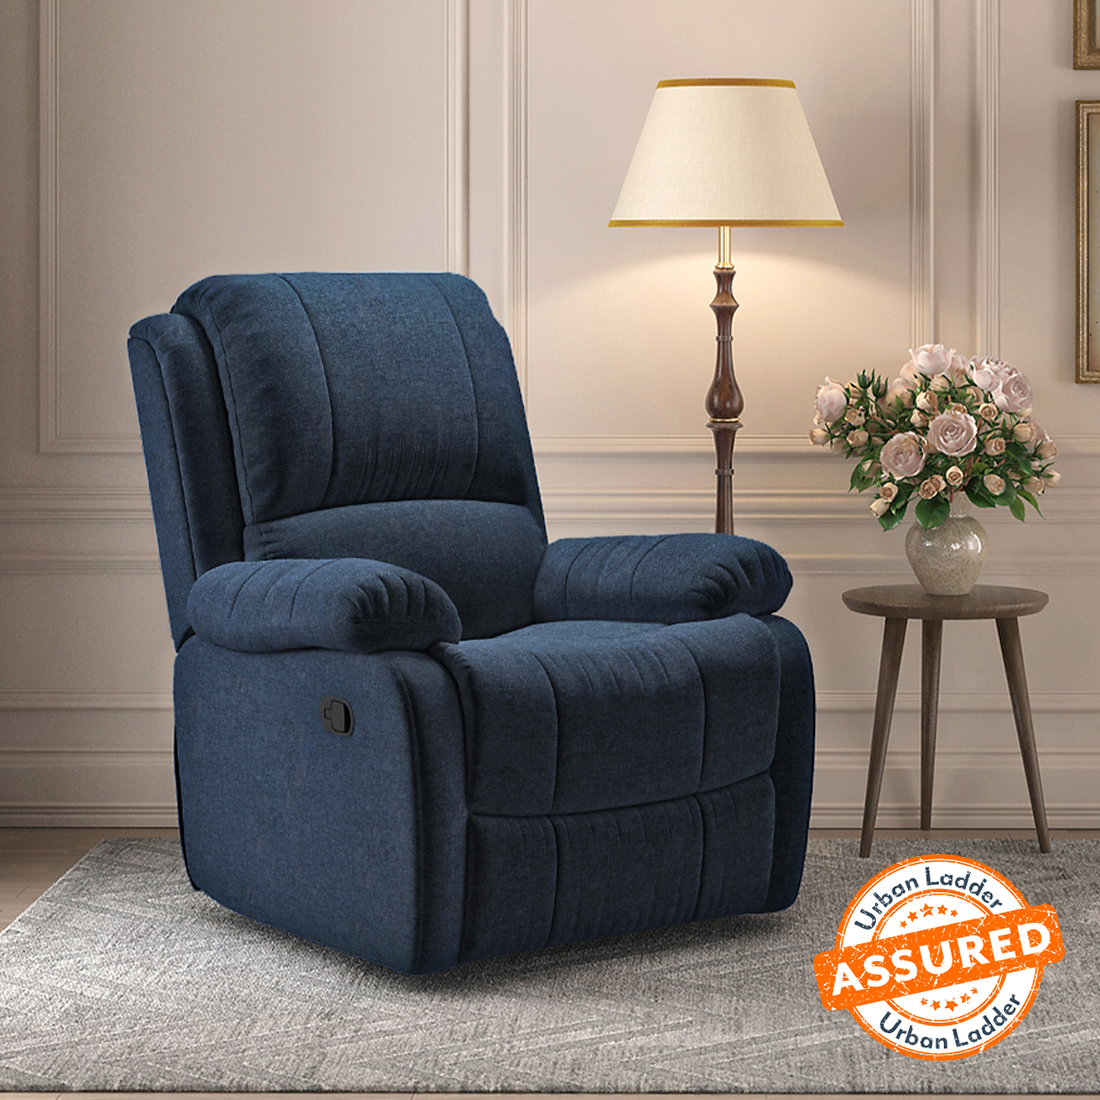 Recliners Online And Get Up To 50 Off Now Urban Ladder